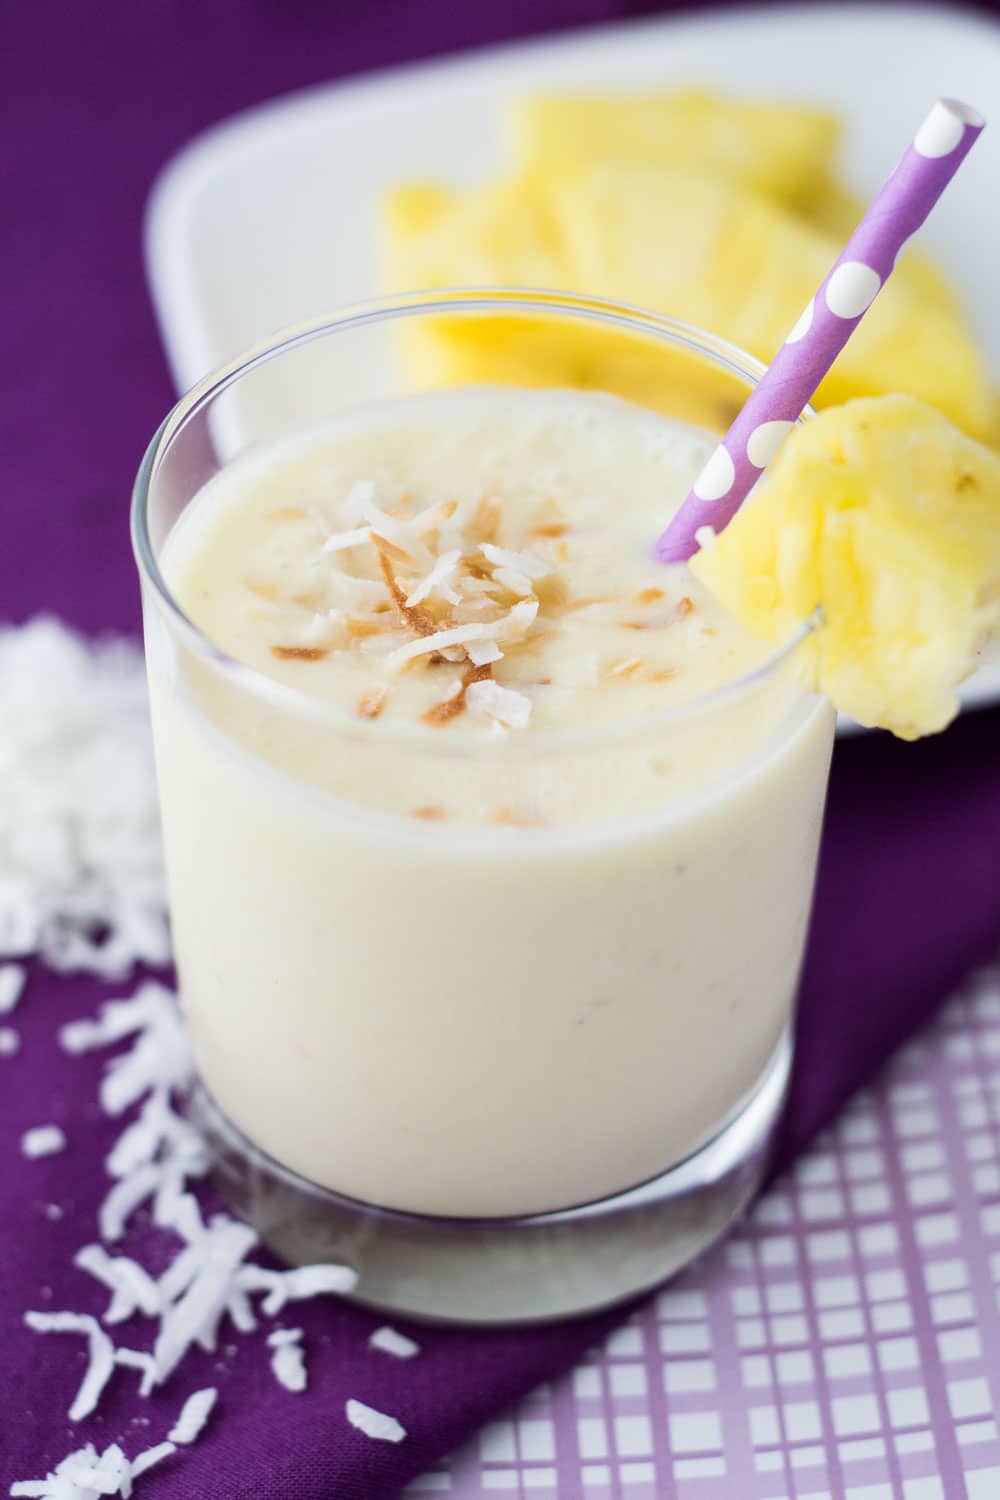 This creamy, dreamy Pineapple Coconut Smoothie is the stuff summers were made for. What a yummy way to cool down!